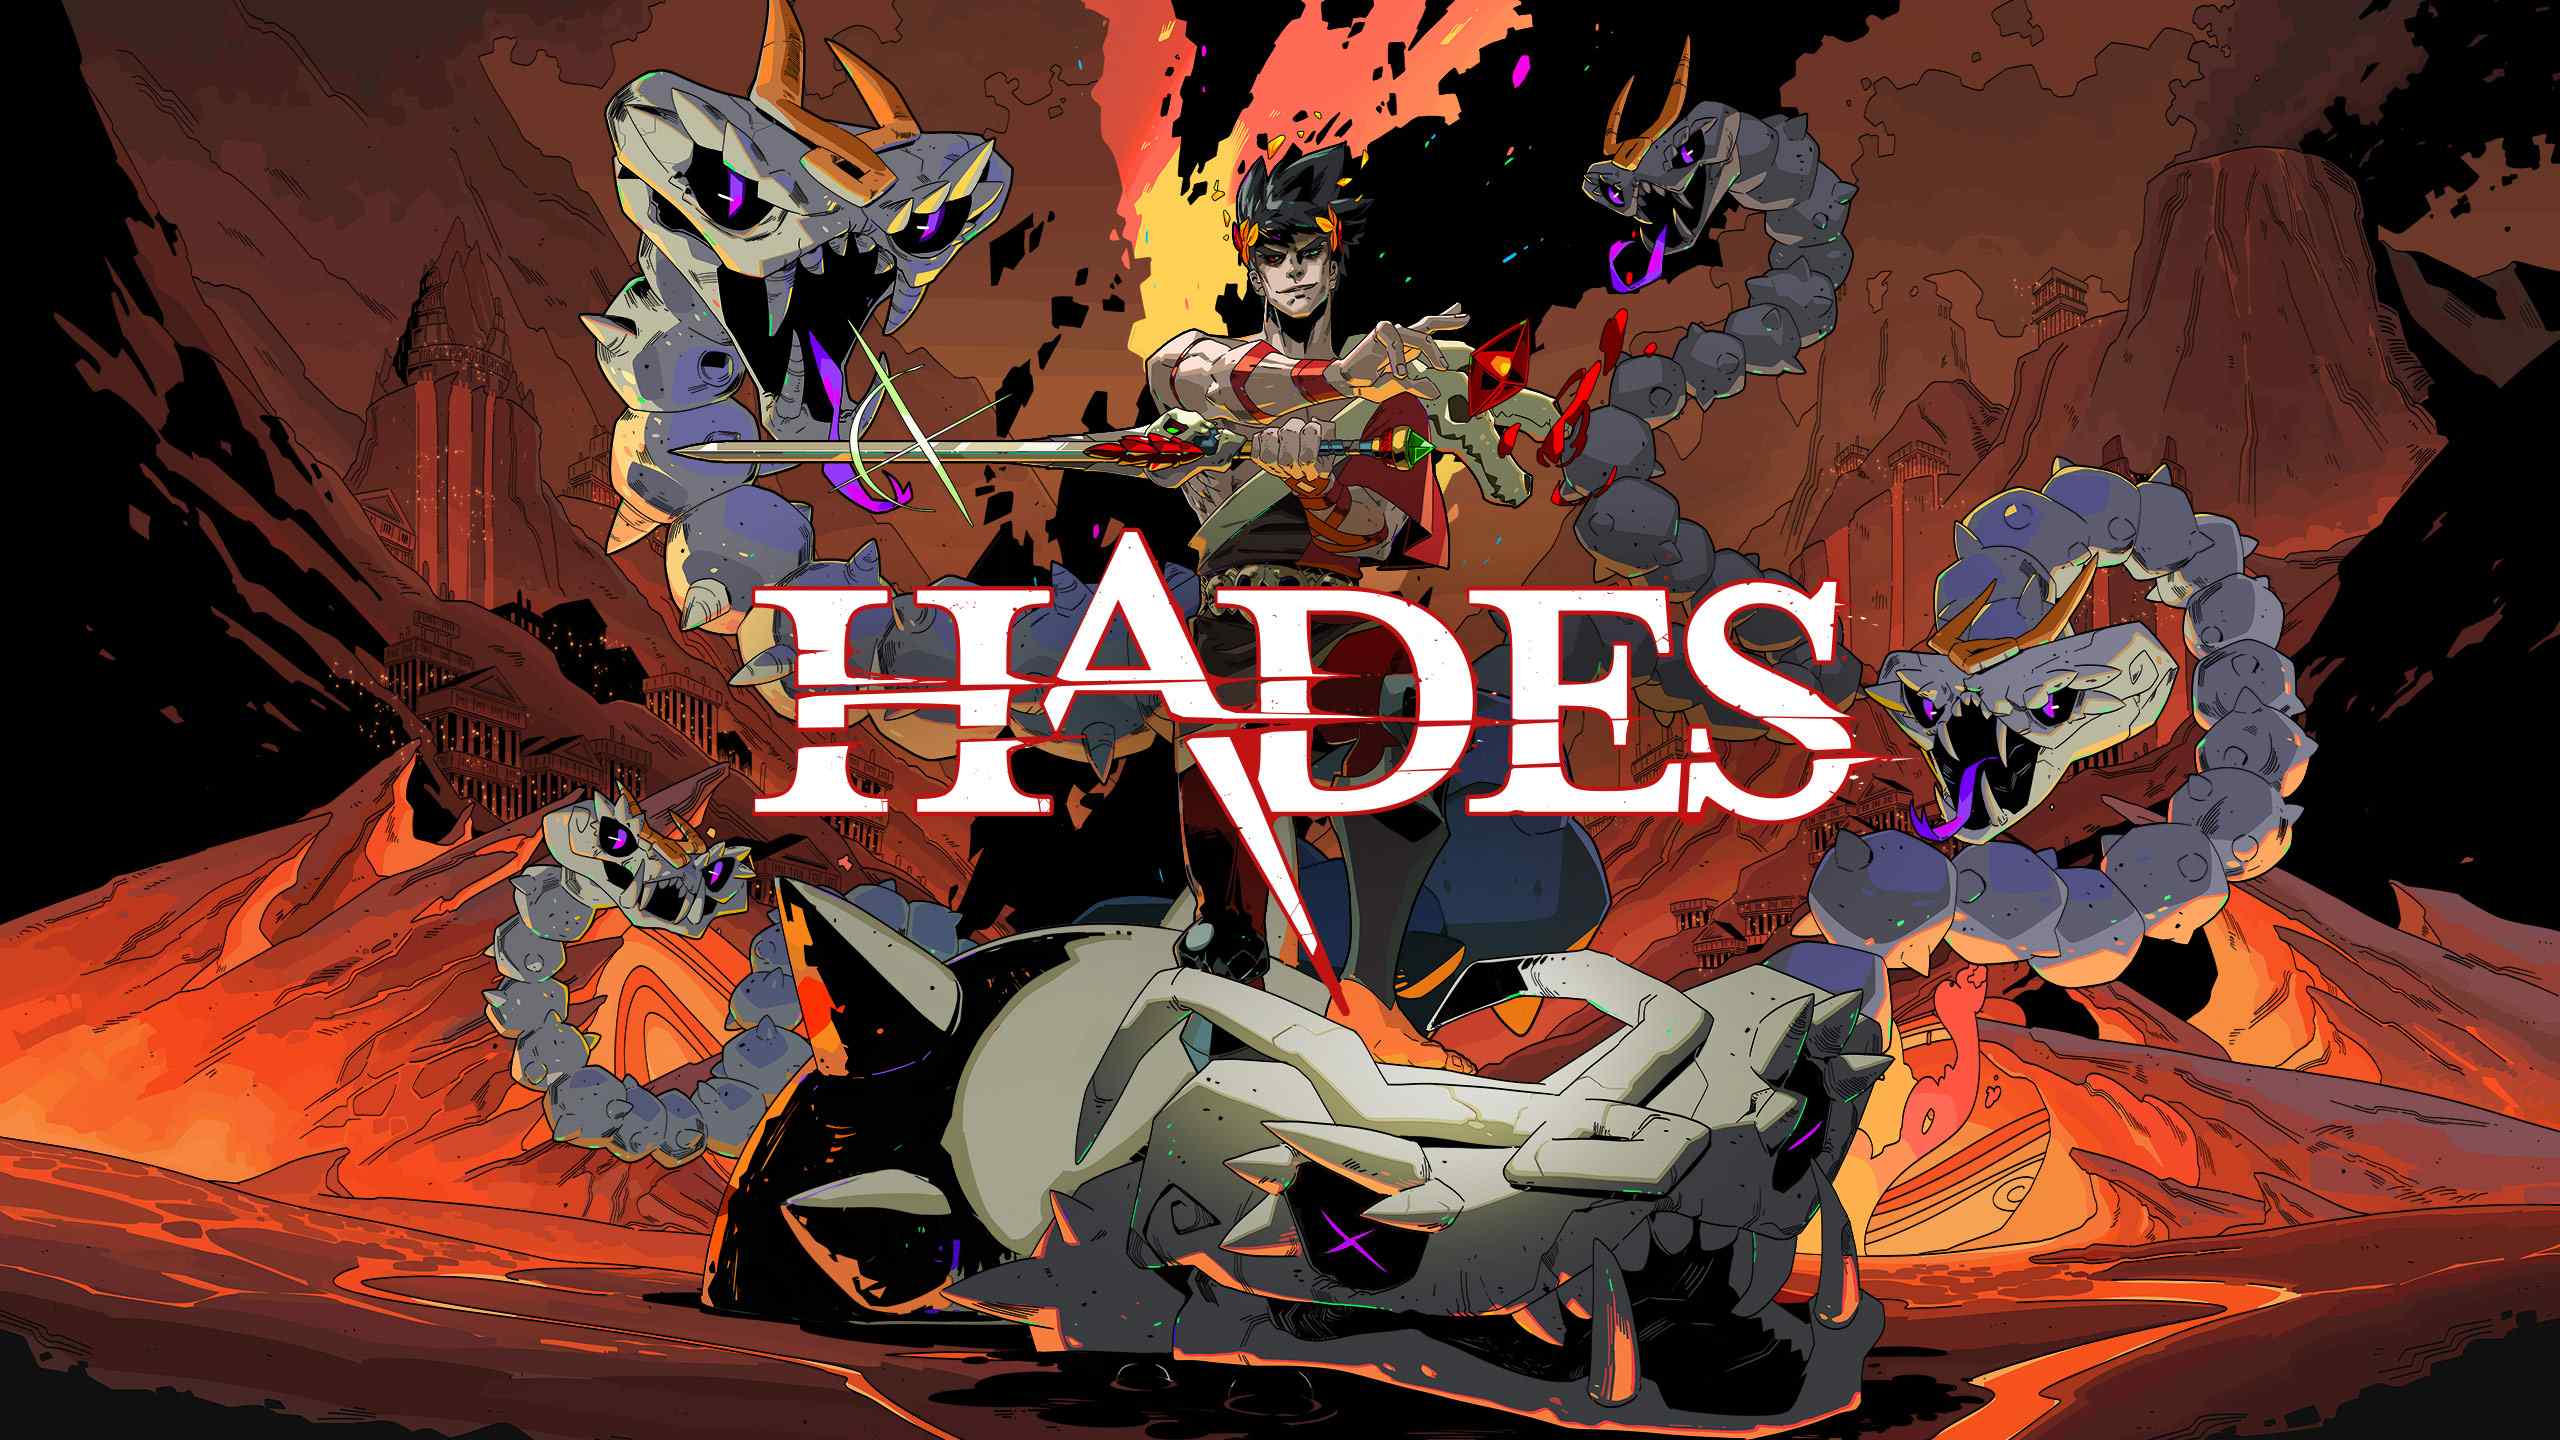 The world of Greek mythology sets the stage for an action-packed roguelike game called Hades.